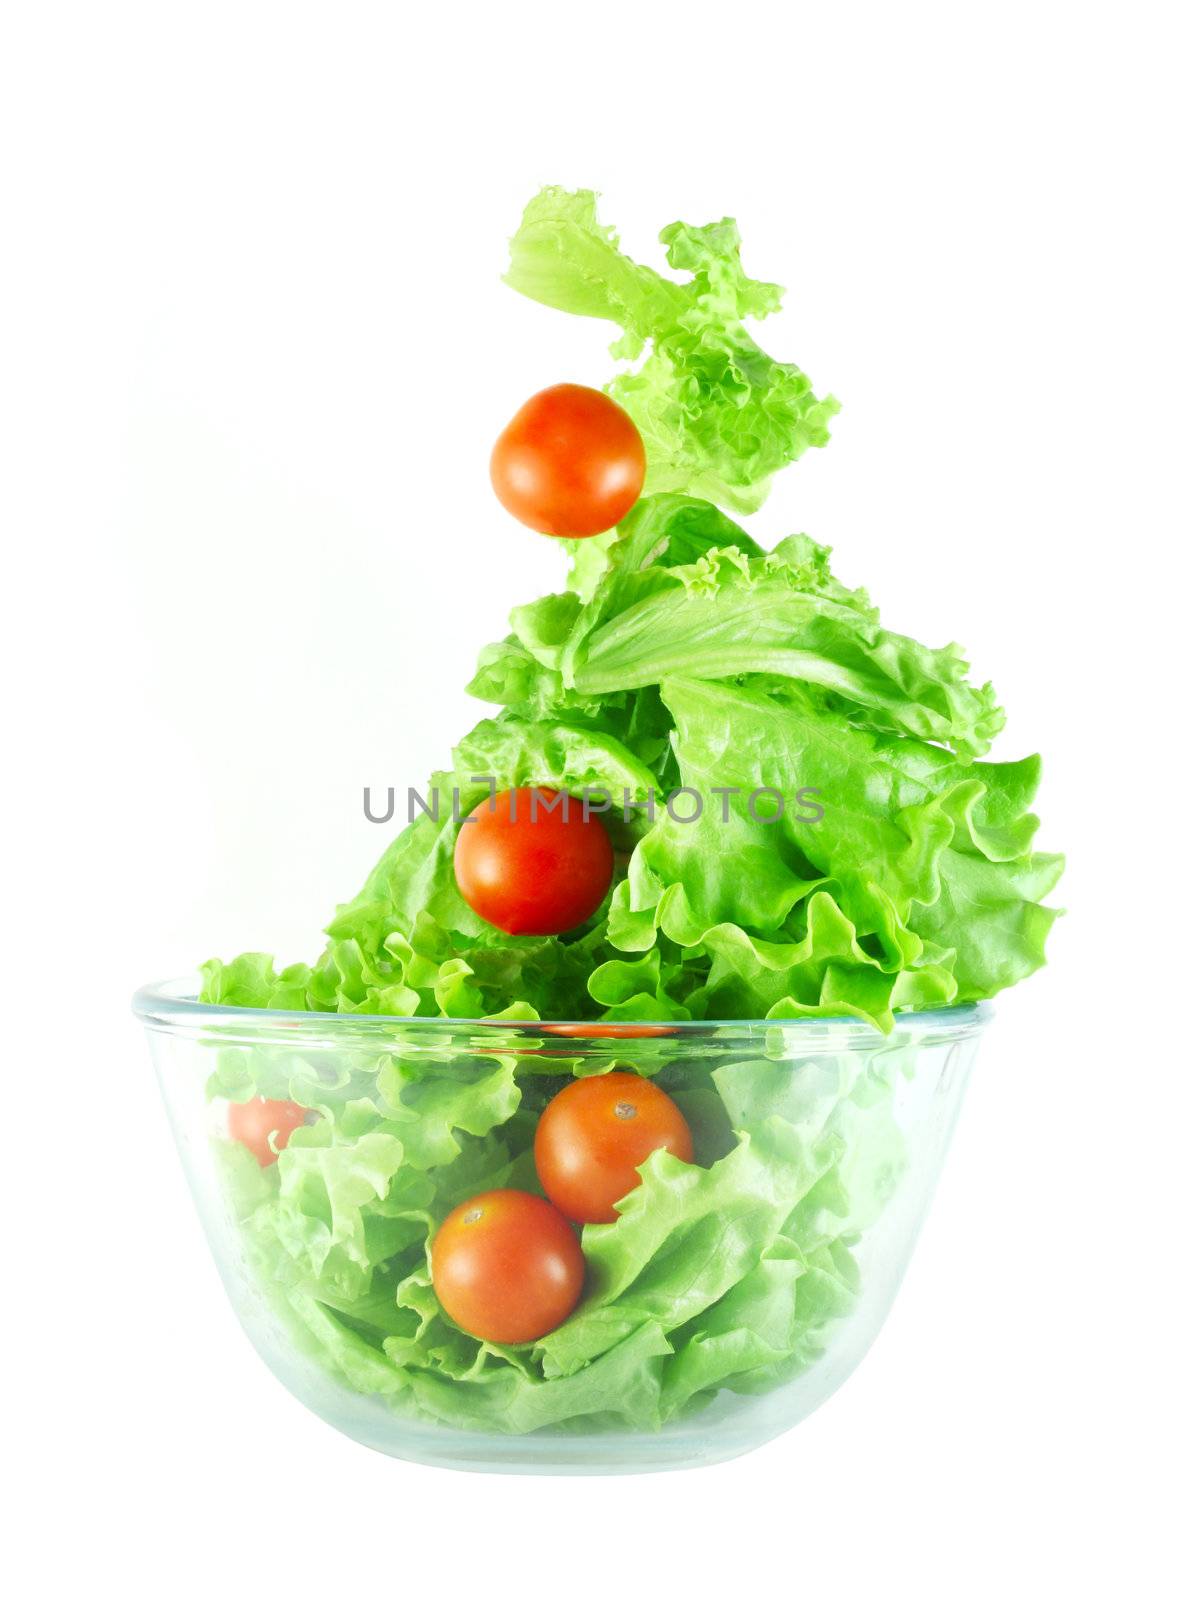  Light lettuce and tomatoes flying salad concept by destillat